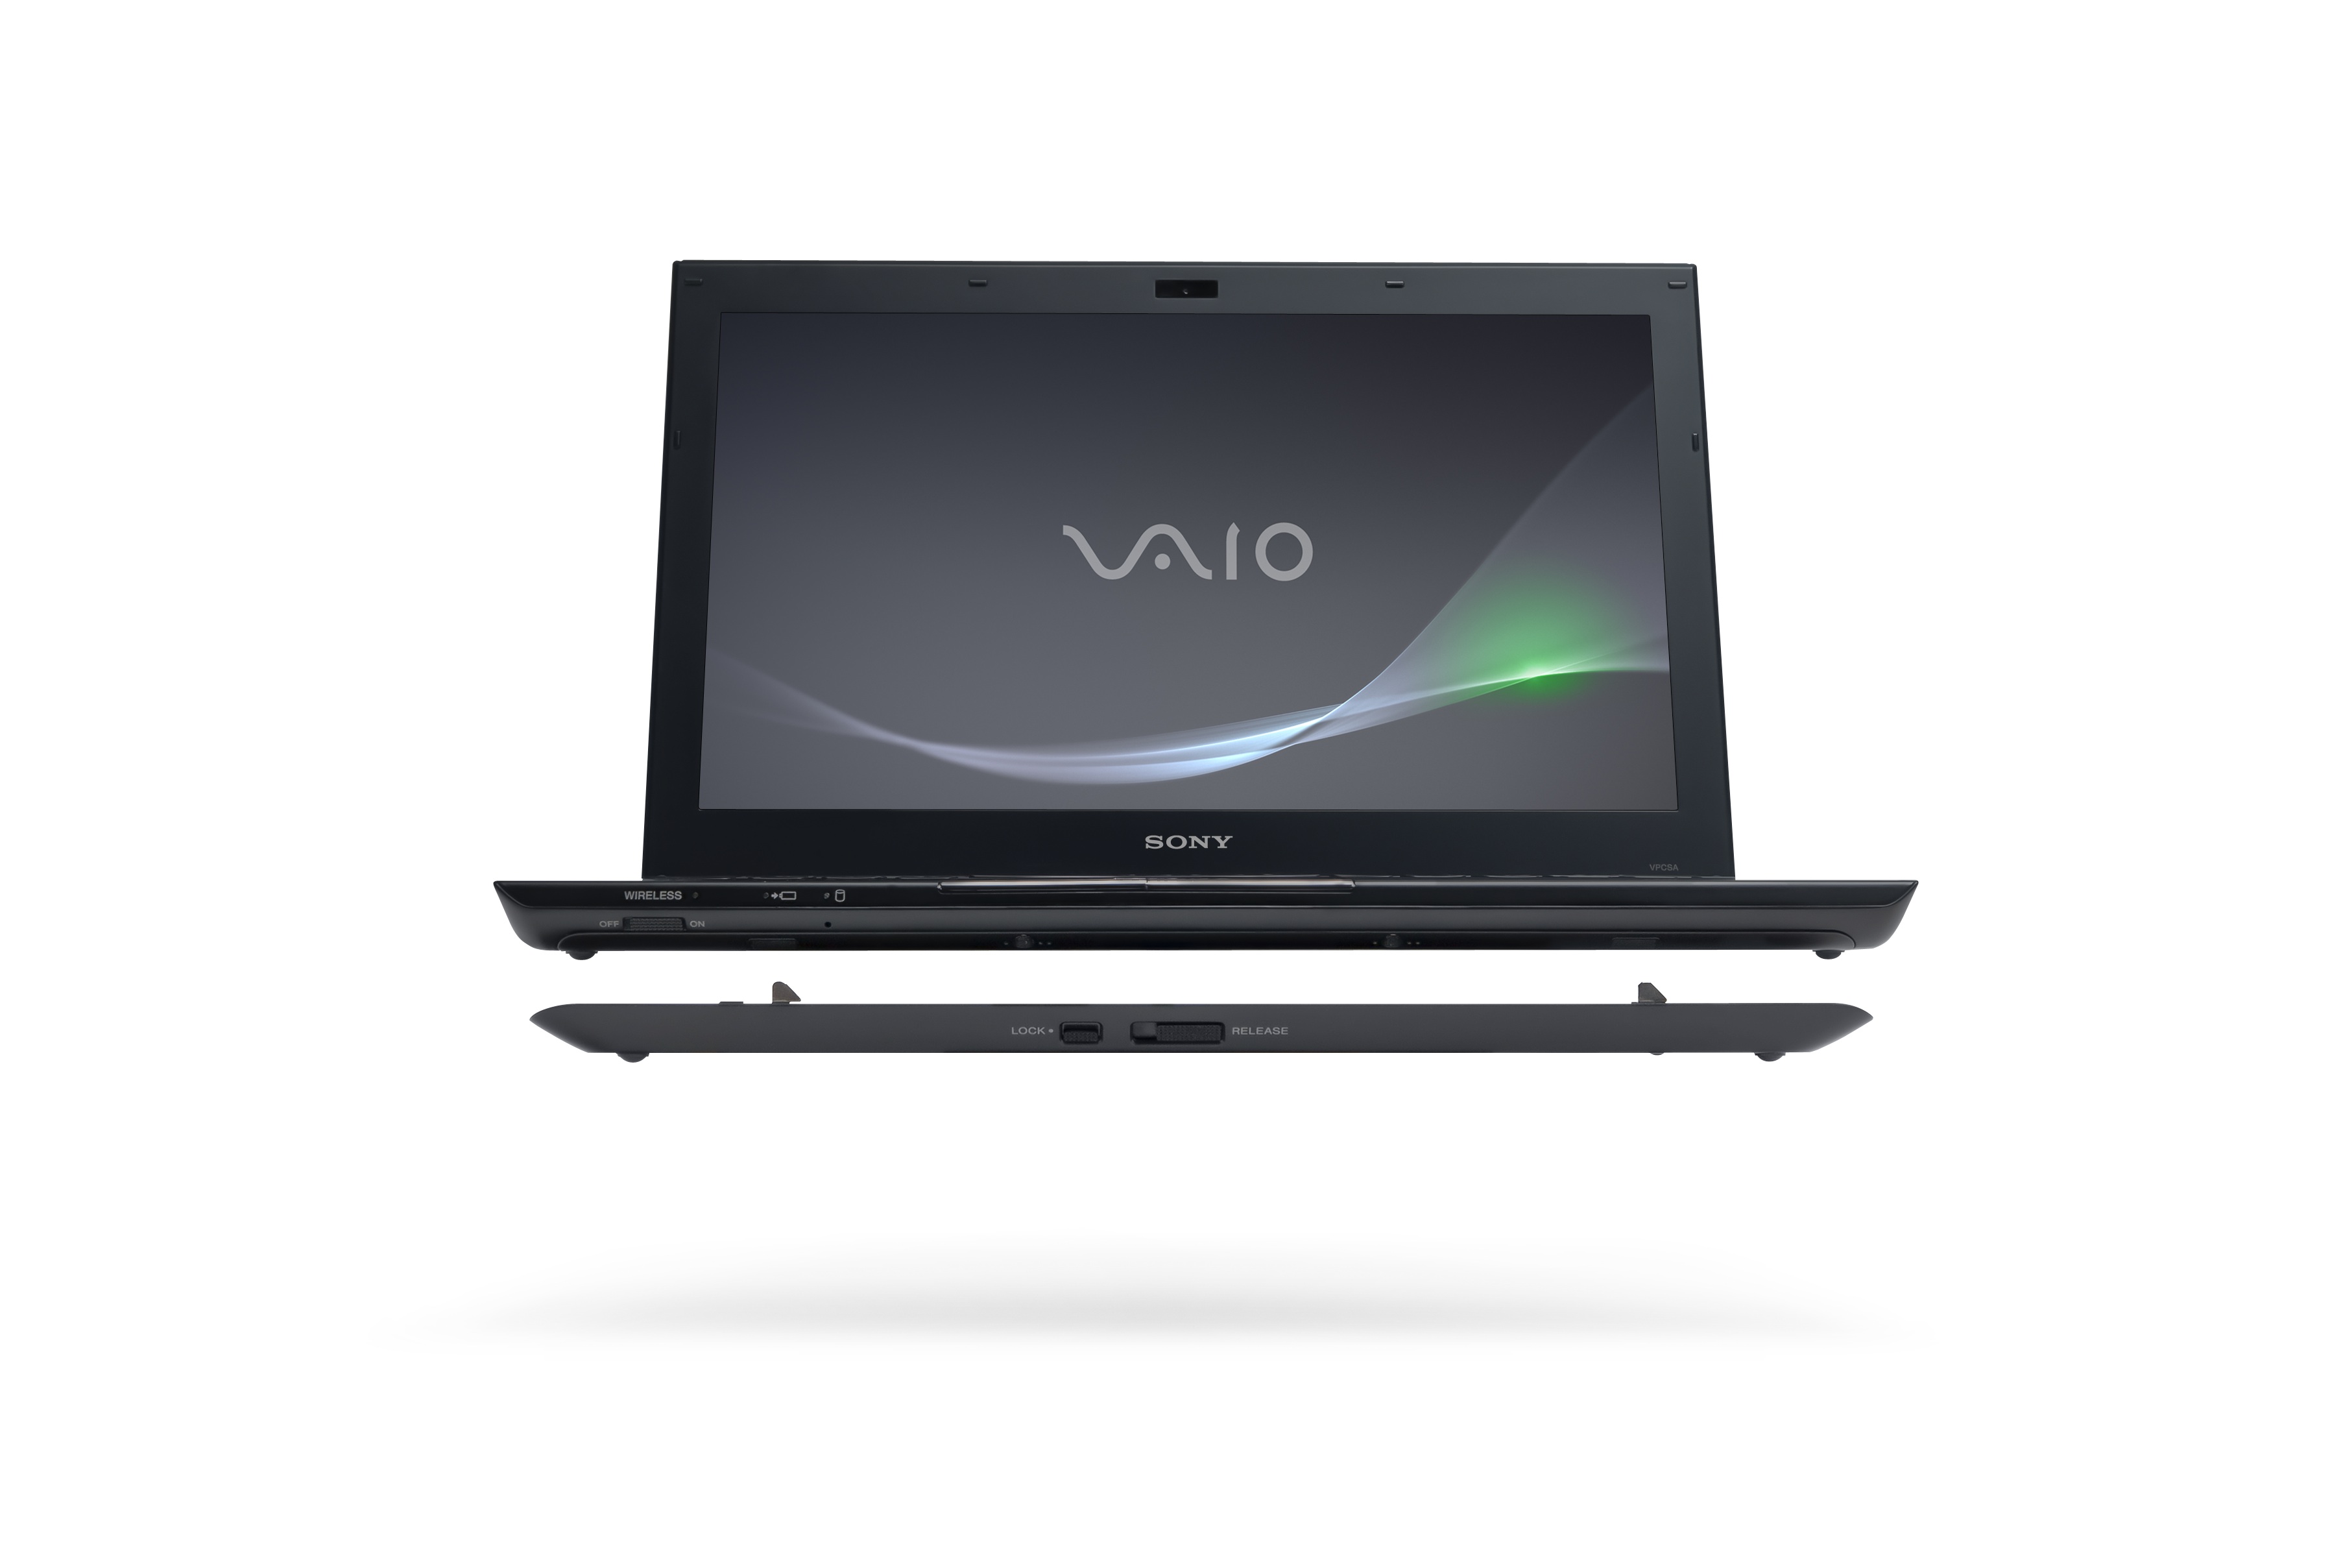 Unboxing and Hands-On: VAIO S-Series 'Charged and Ready' Program